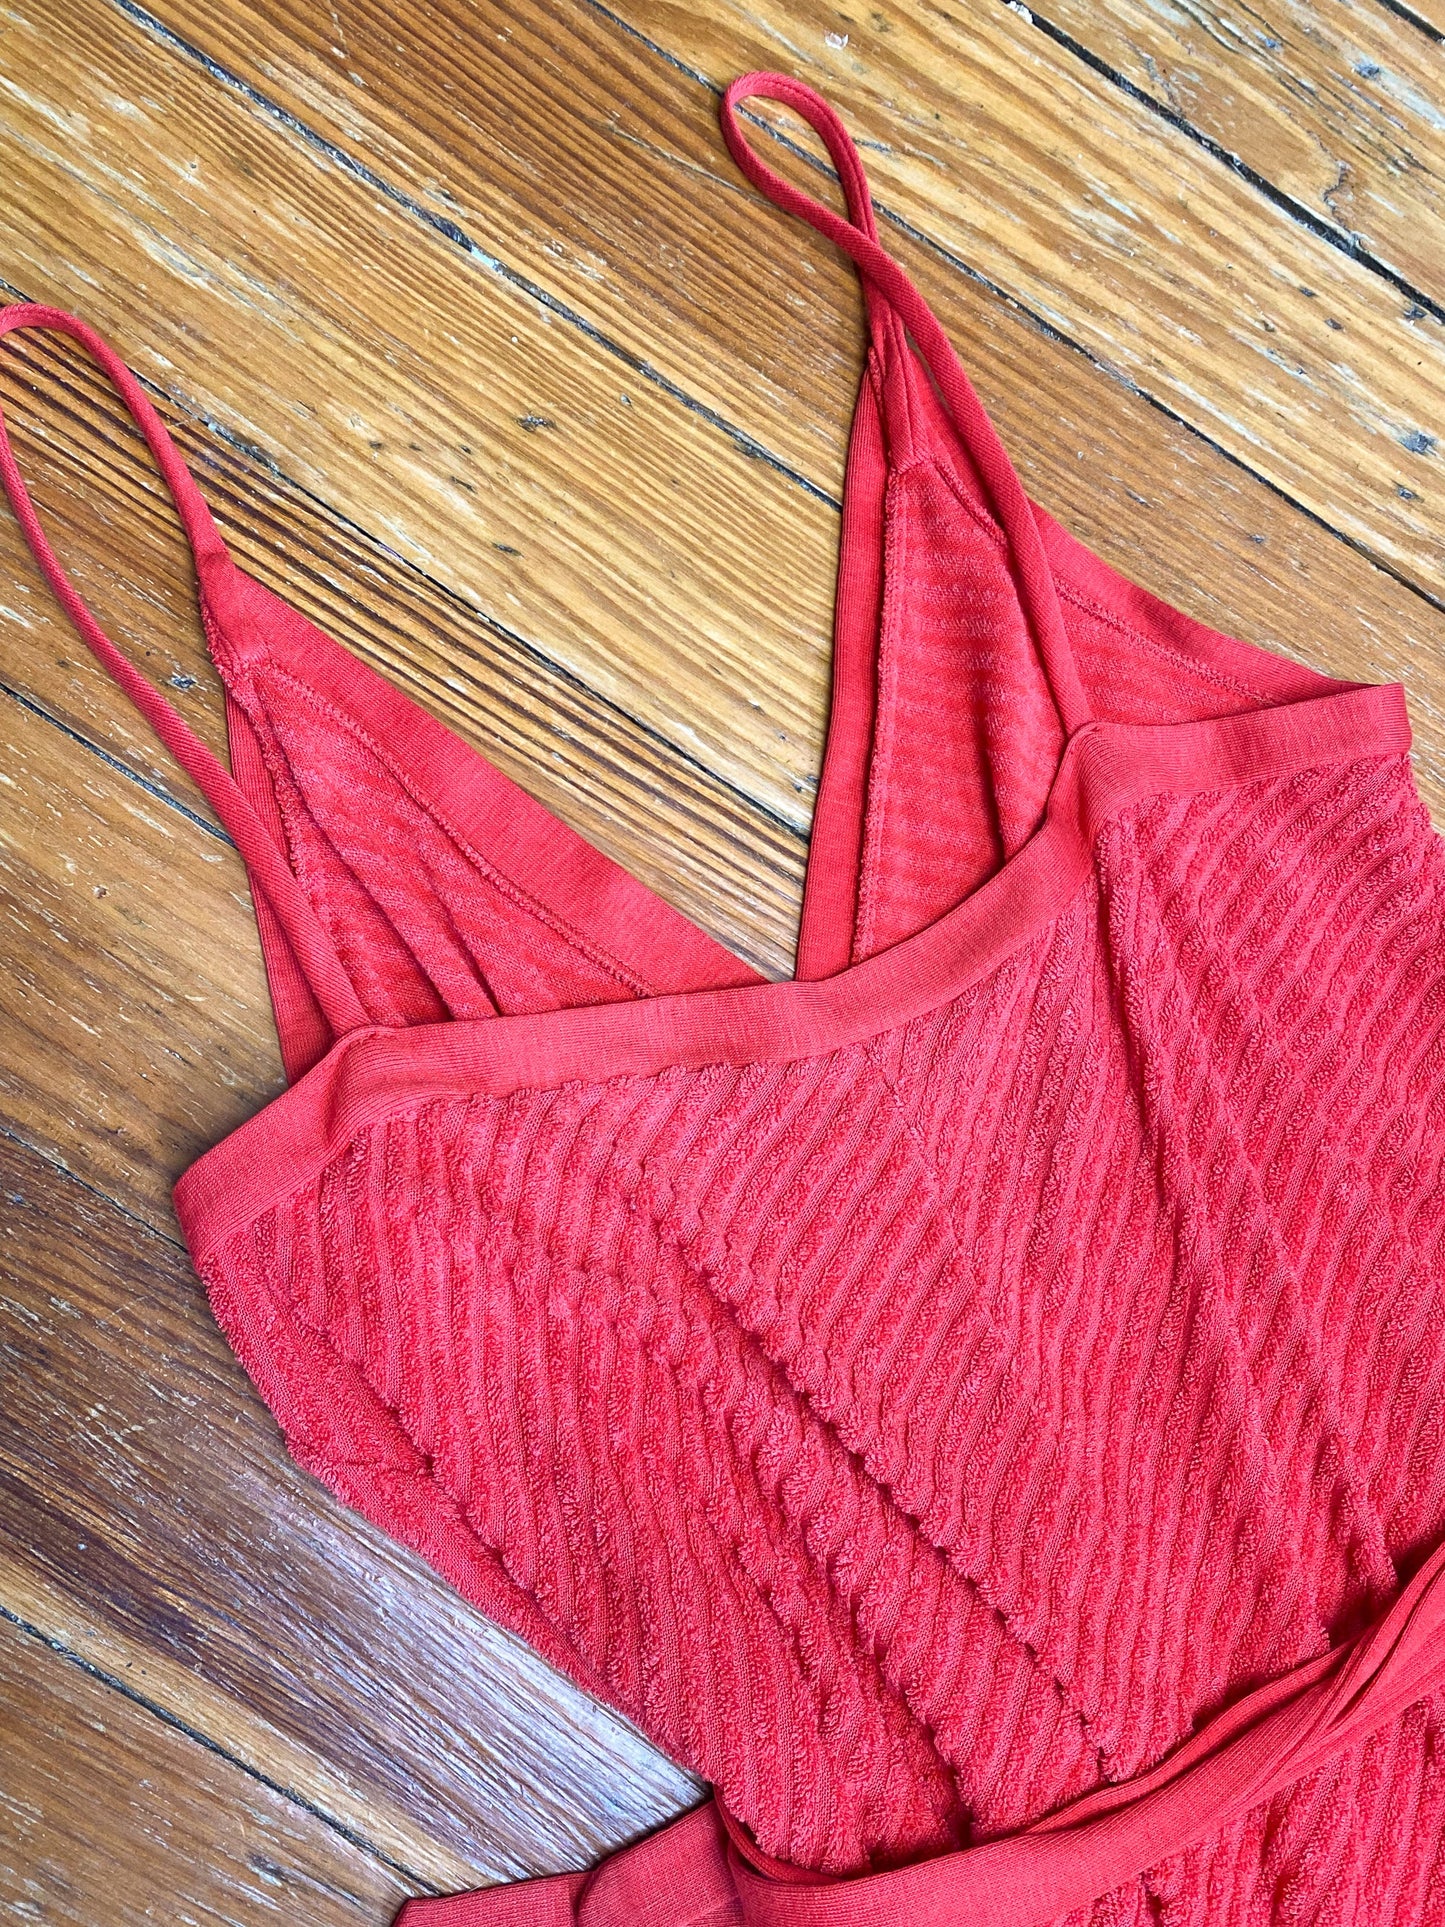 70's Red Terry Cloth Beach Cover up Playsuit